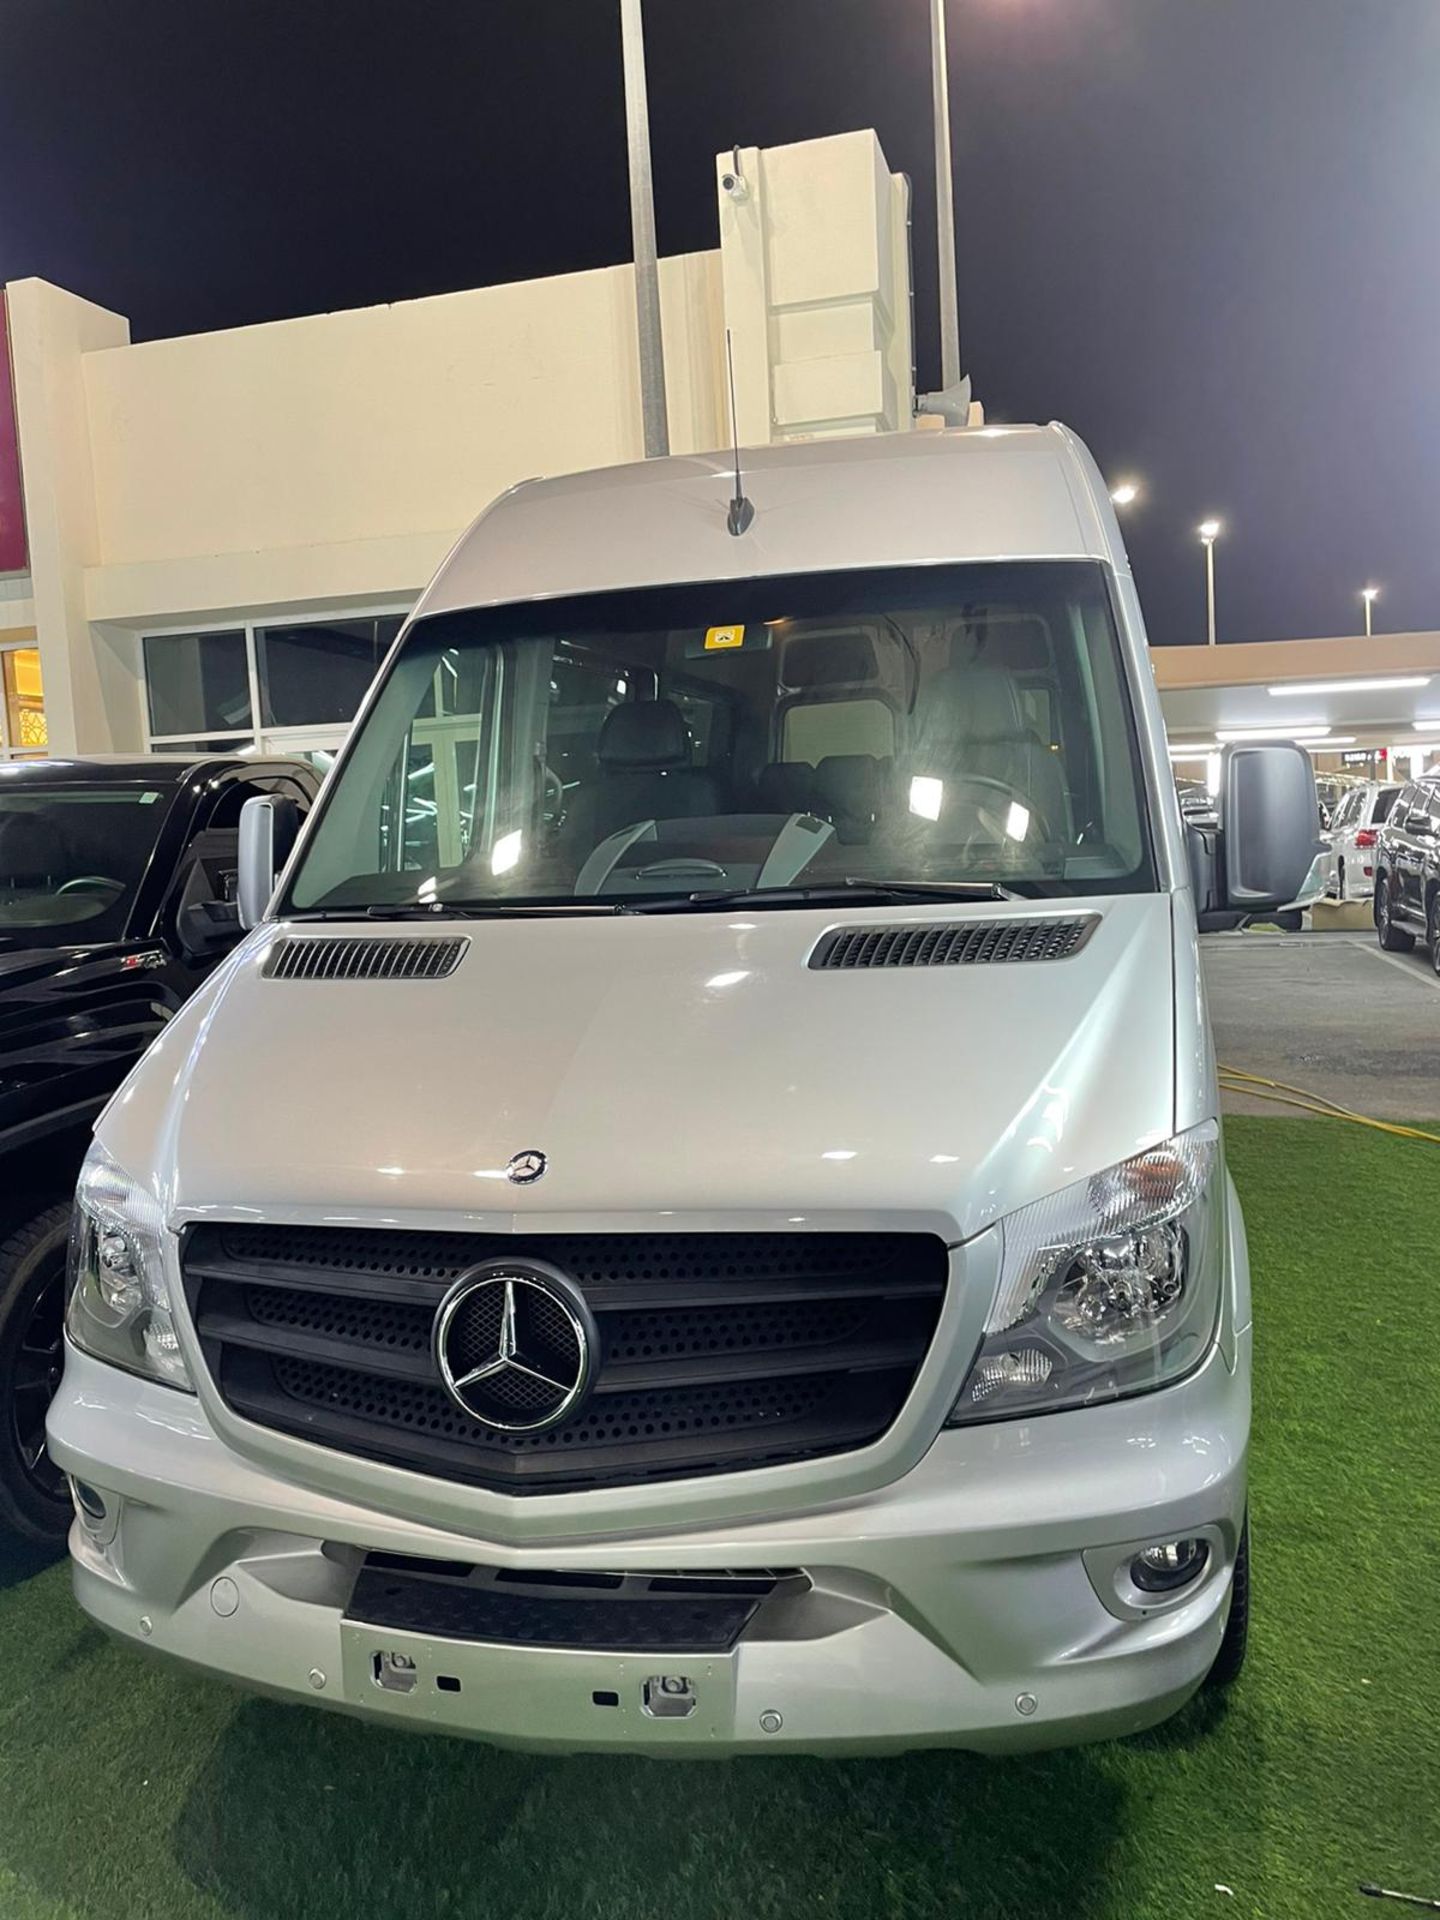 2016 Mercedes 324 sprinter luxury - 11,000km only electric doors - with nova or can sell vat free. - Image 2 of 11